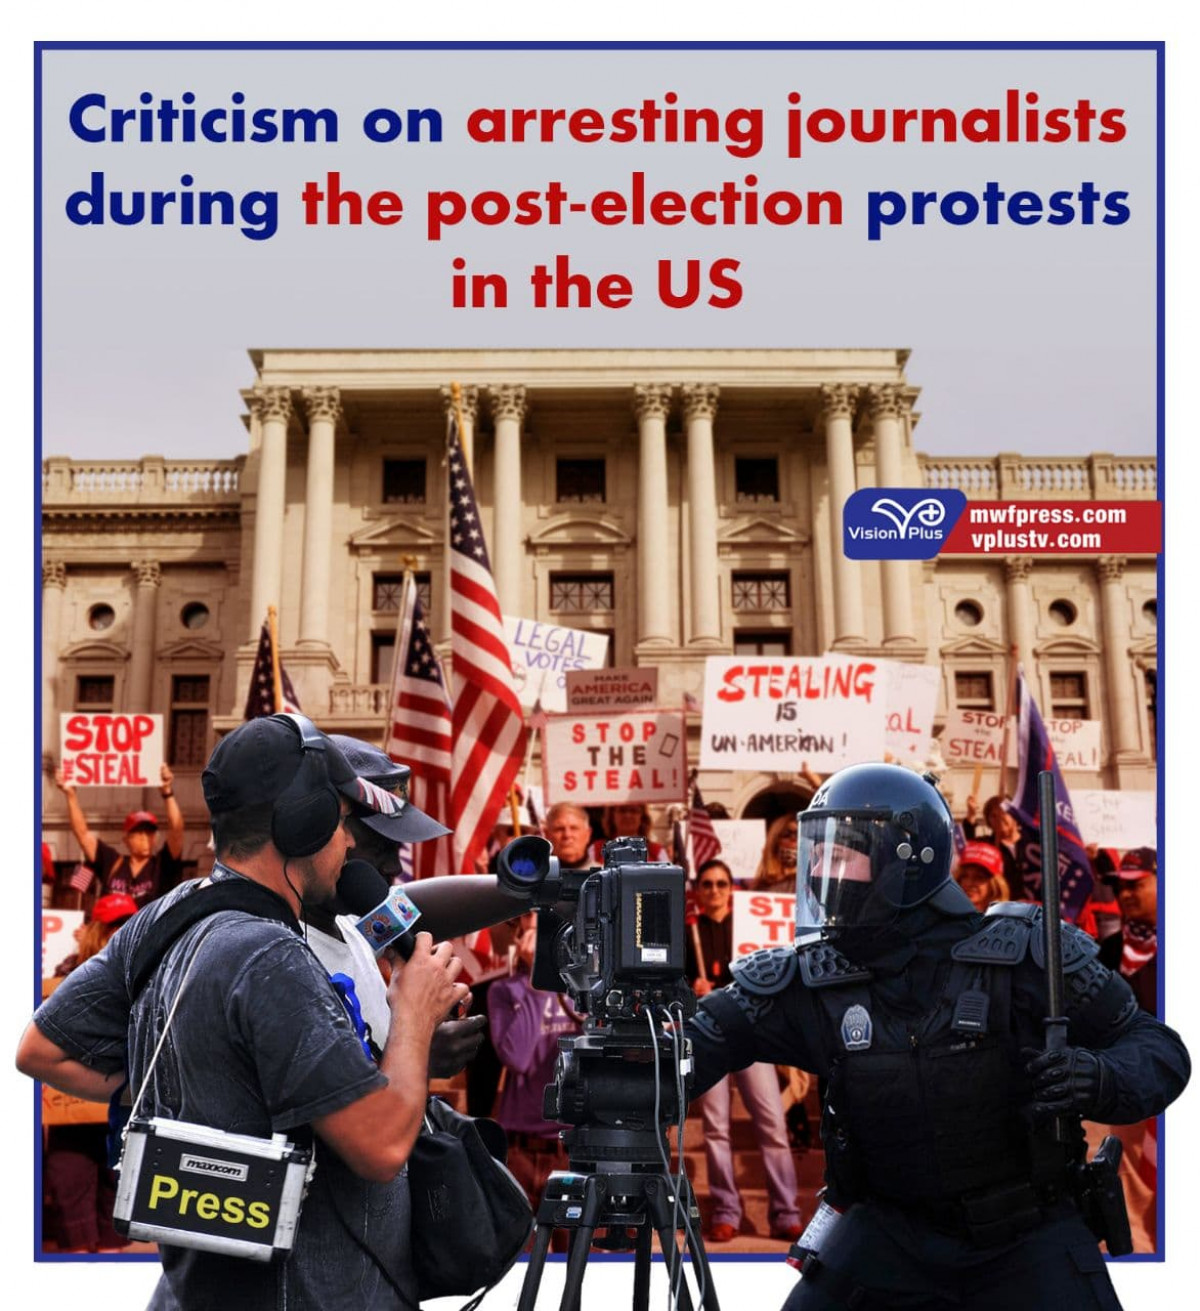 Criticism on arresting journalists during the post-election protests in the US